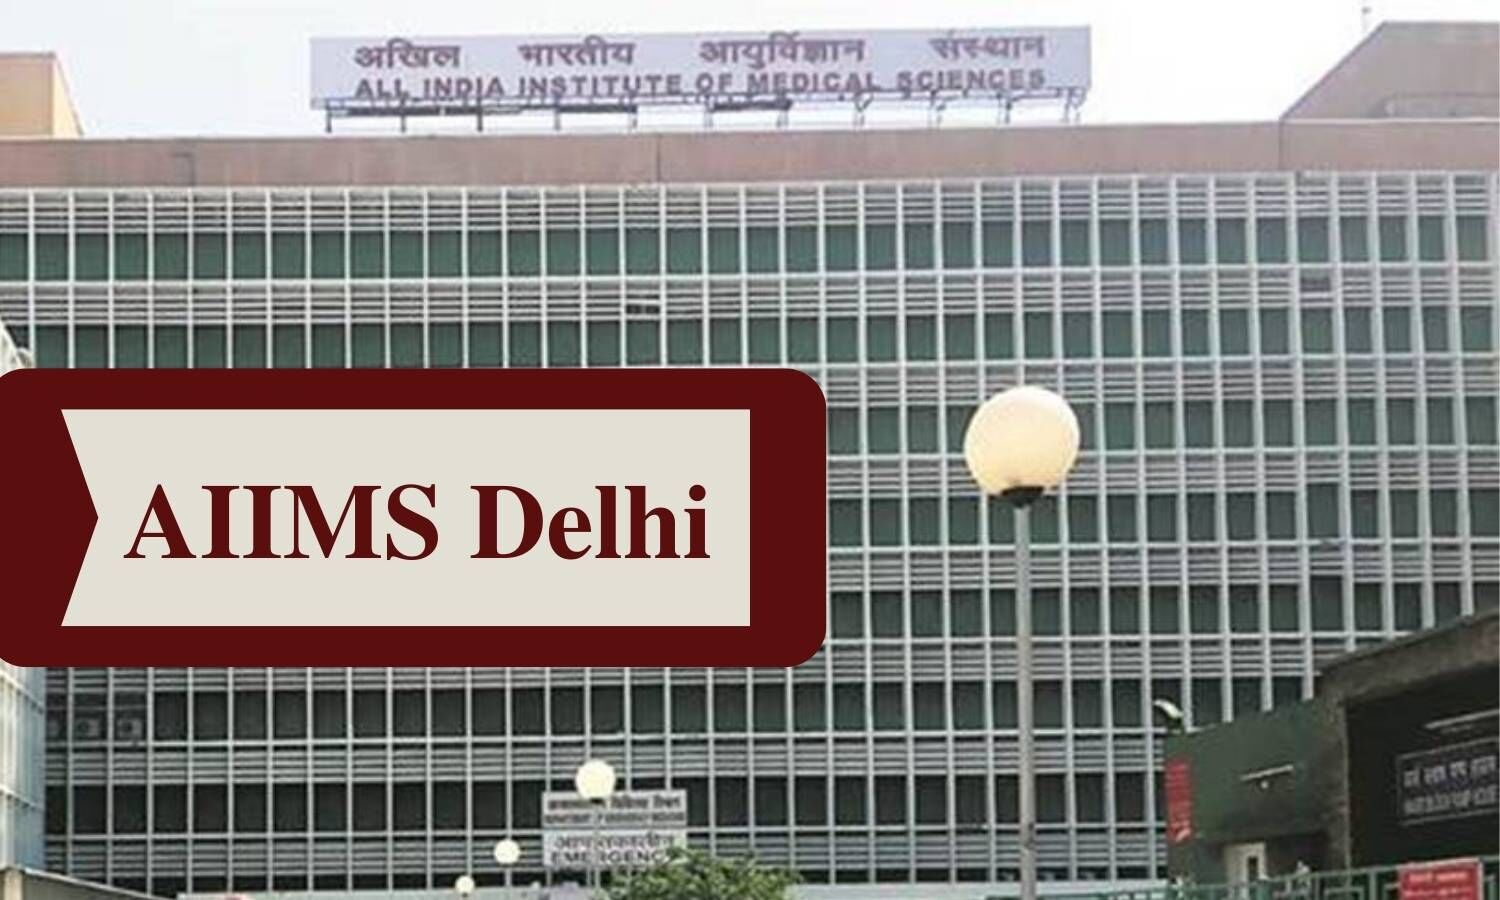 Chinese hackers suspected behind AIIMS Delhi cyber attack